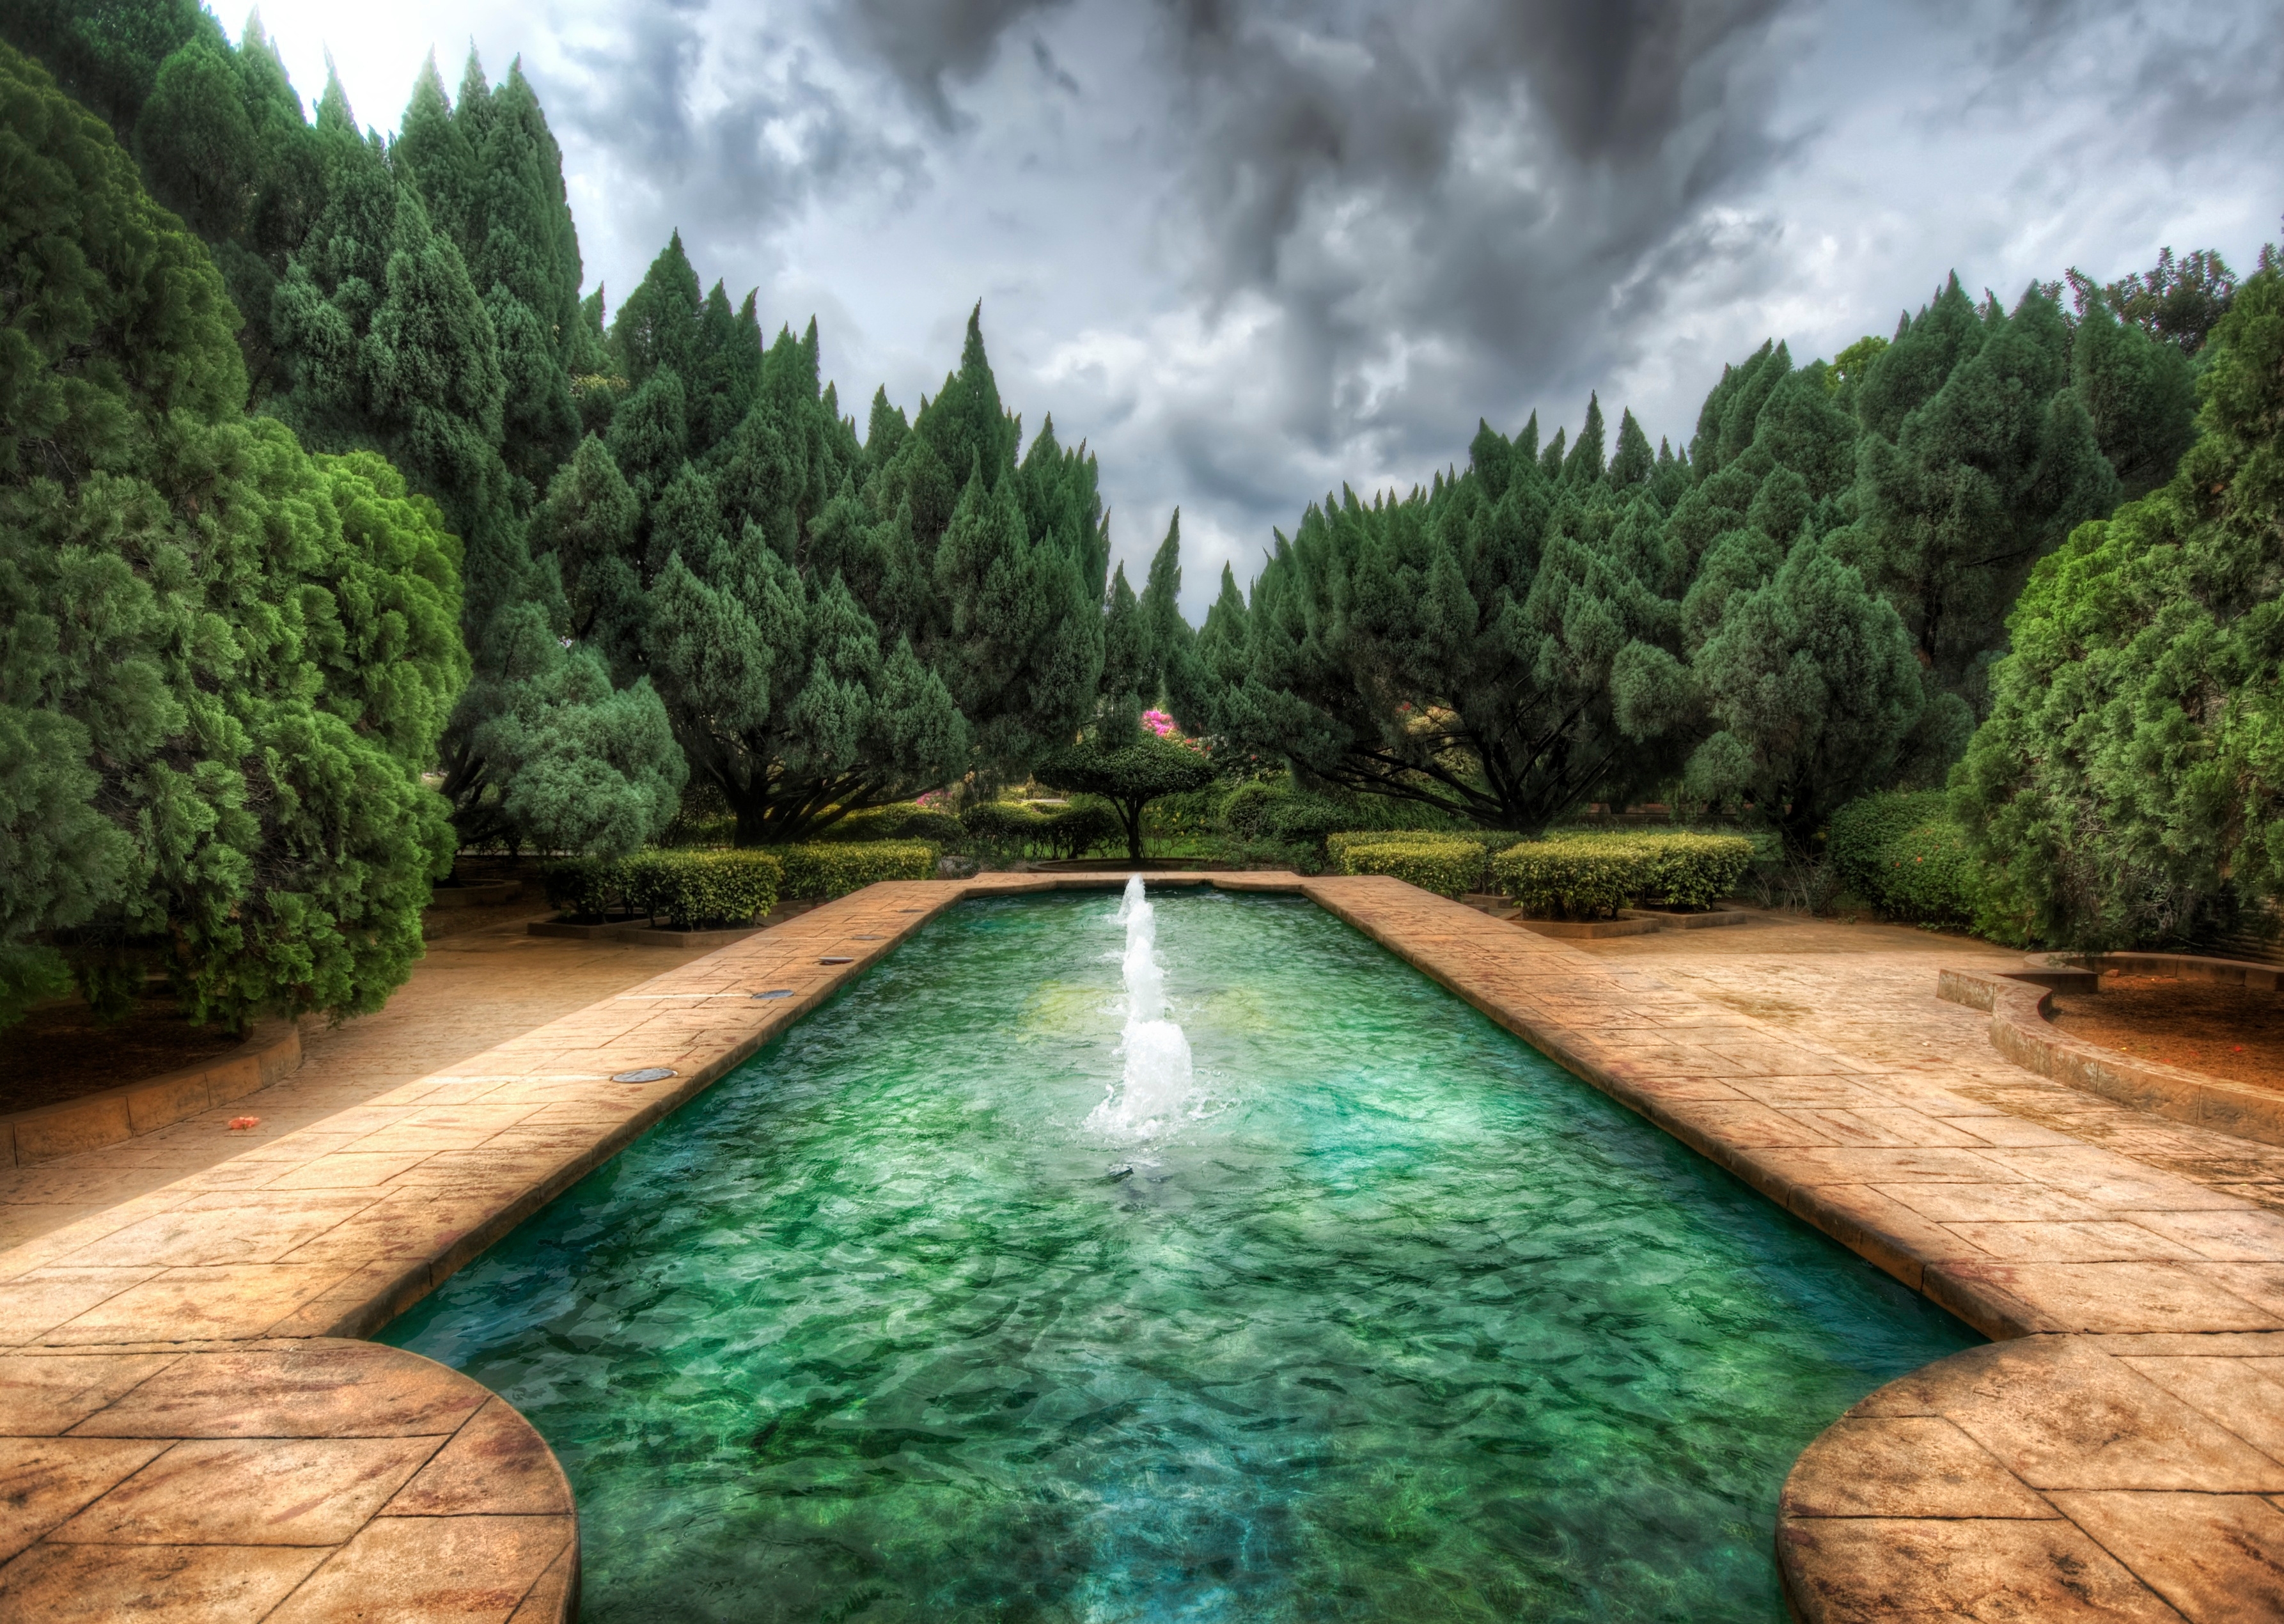 overcast, color, nature, fountain, forest, colors, mainly cloudy, paints, pool Full HD